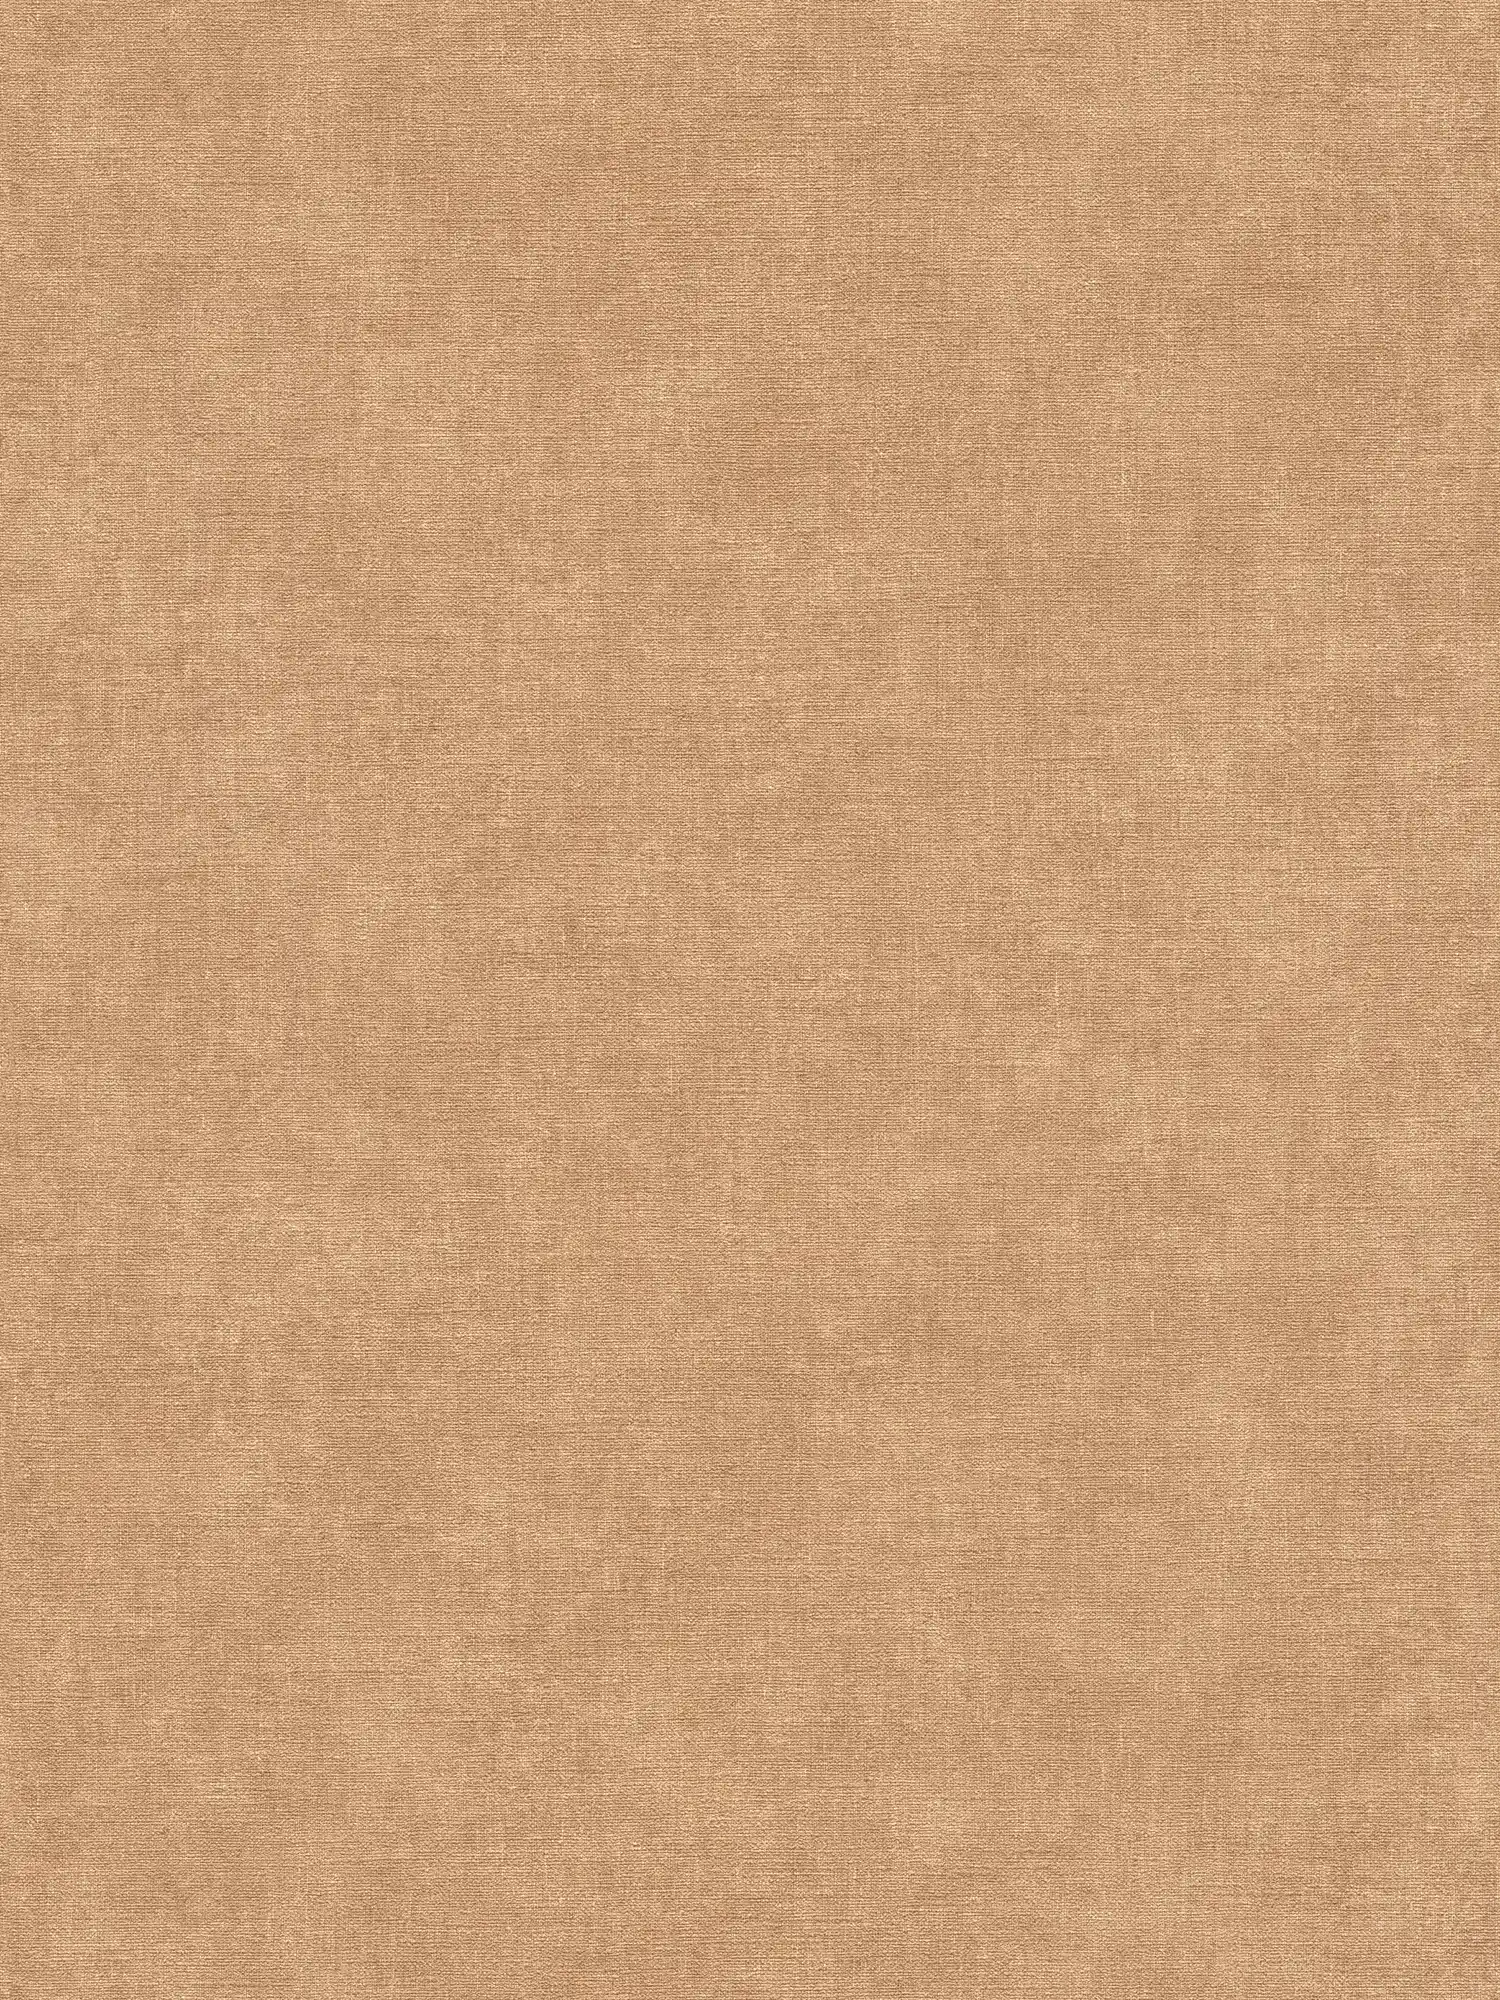 Plain wallpaper with light texture in textile look - brown, beige
